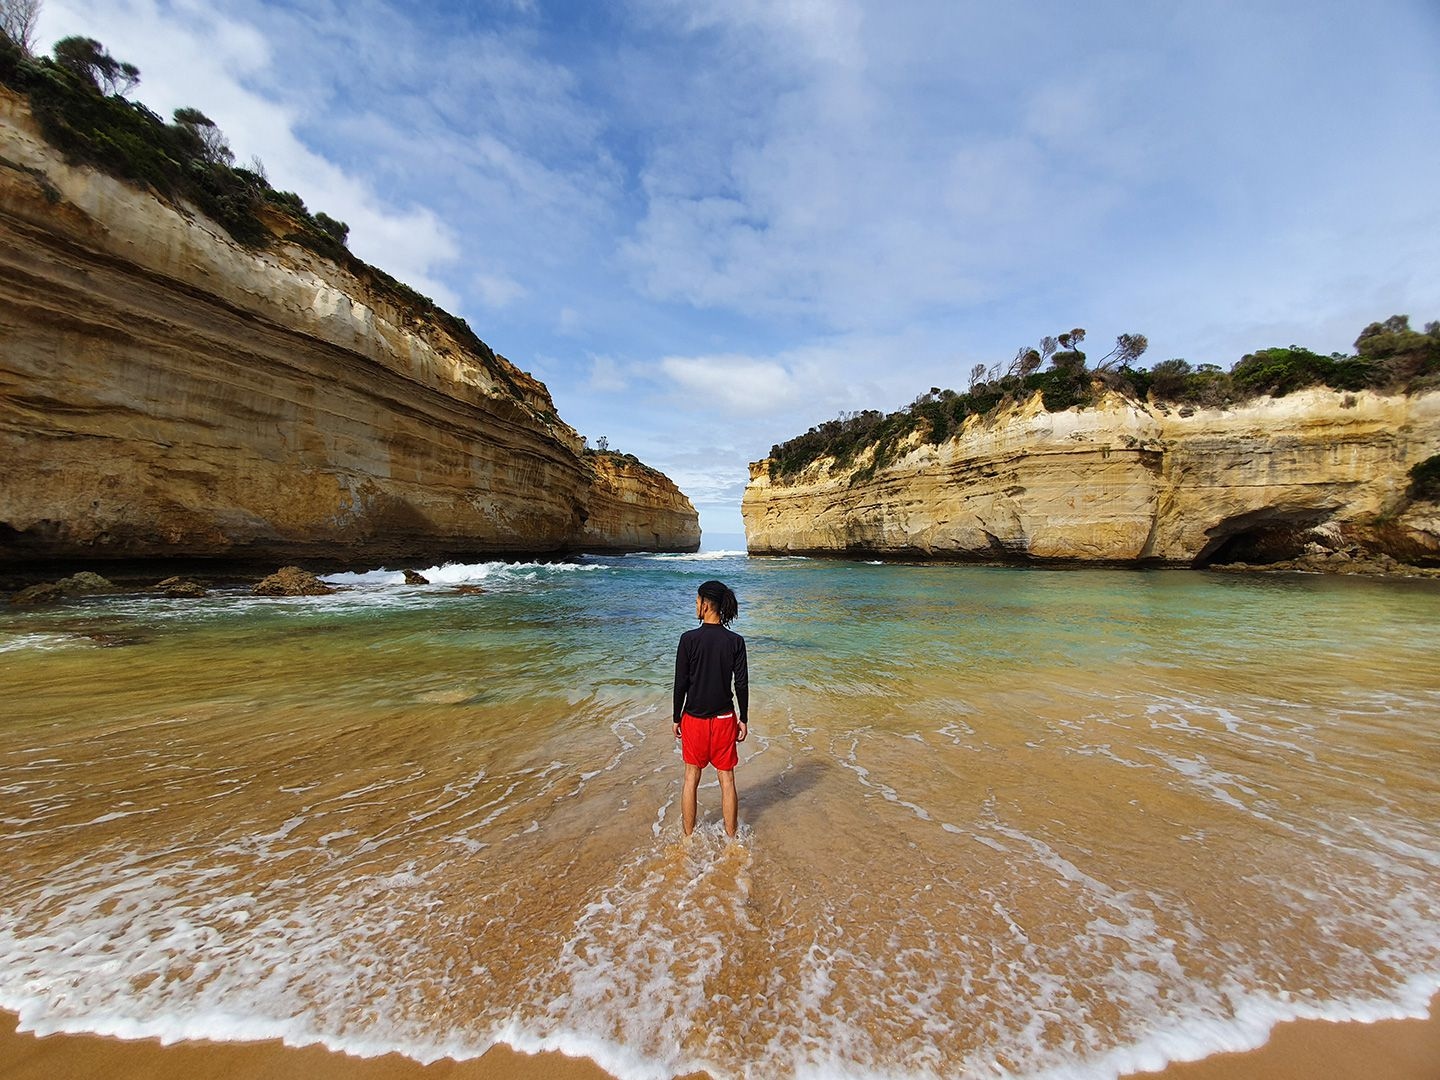 Photo captured by Galaxy S10 plusâs Ultra Wide Camera of a man standing in a body of water in front of seaside cliffs.